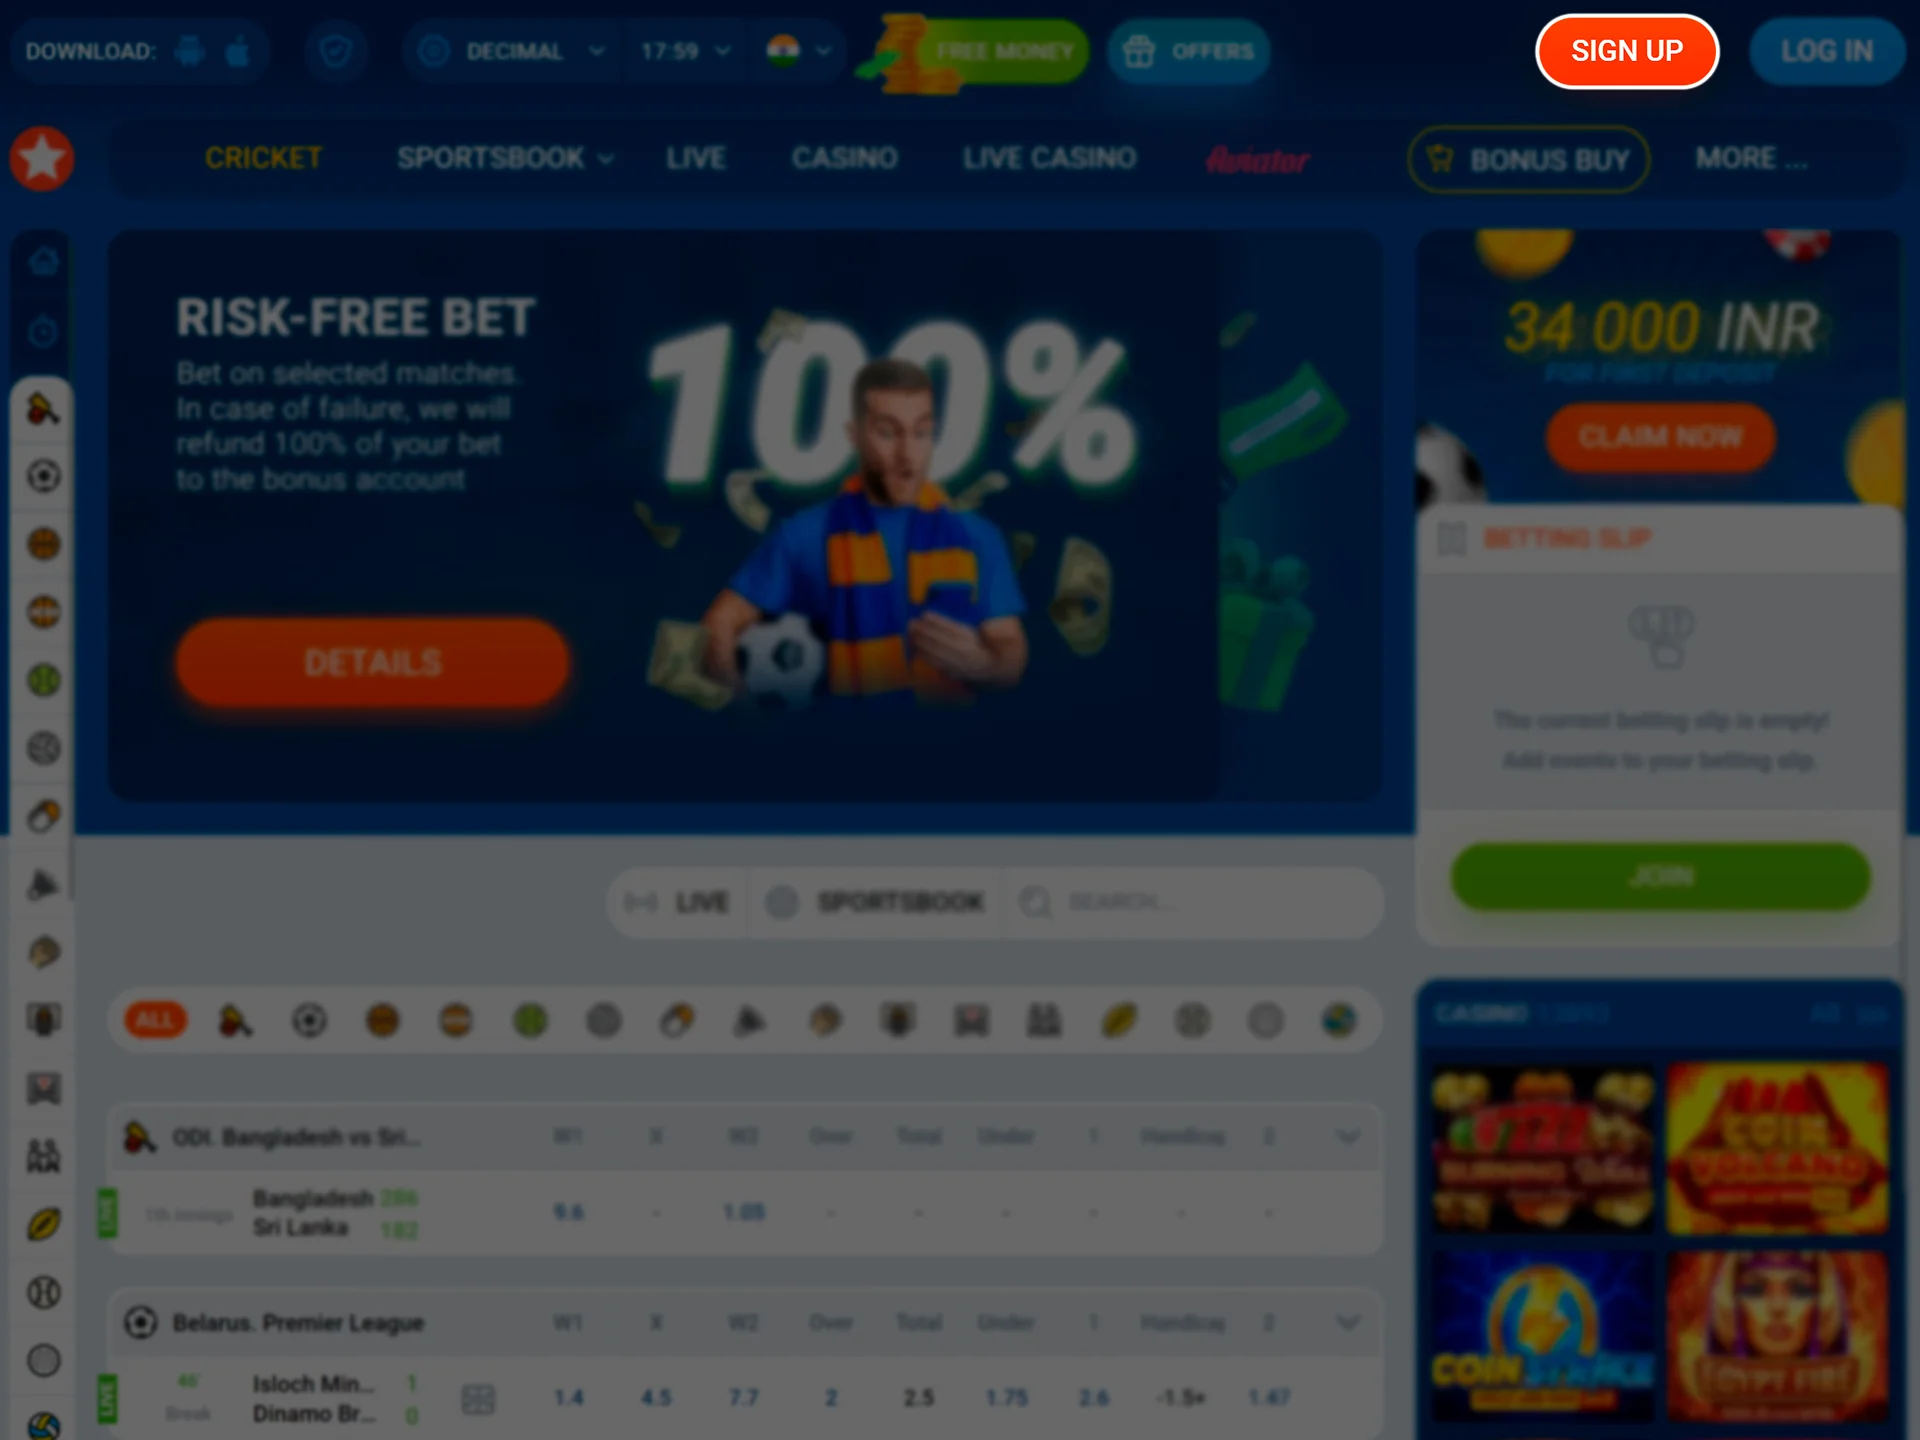 Click on the sign up button to start the process of creating an account at MostBet.